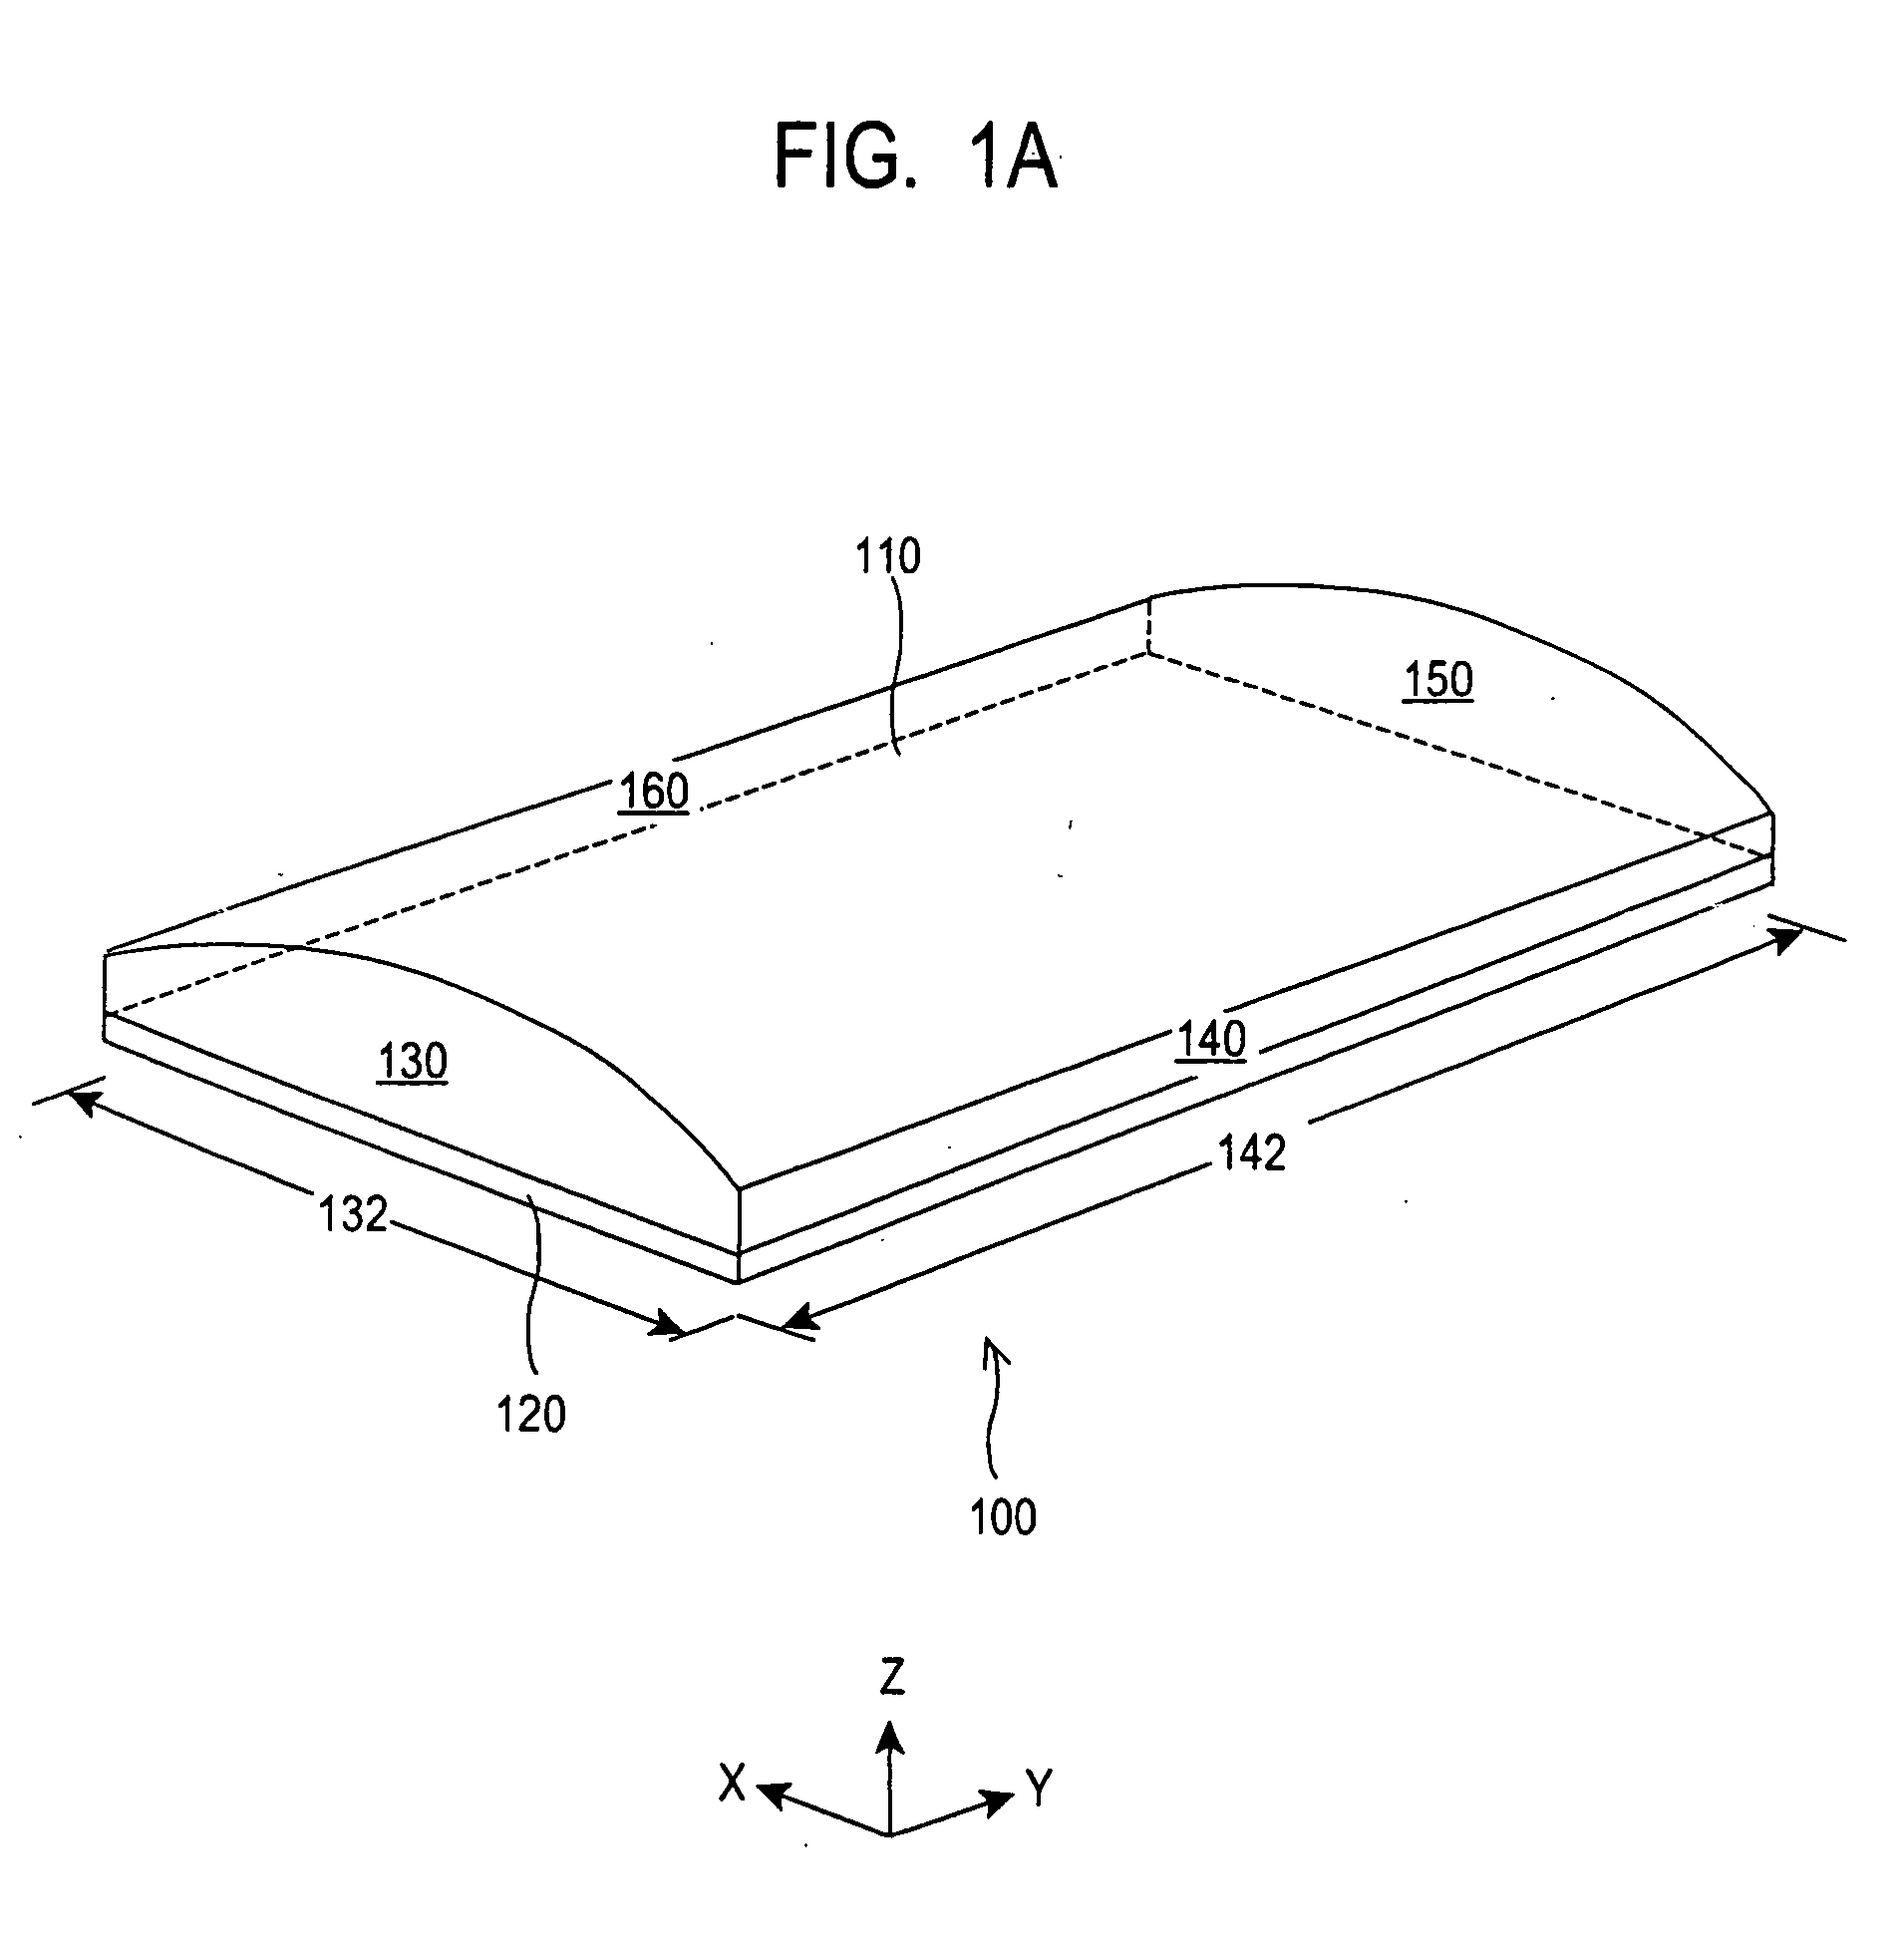 Ultrasound emitting device comprising a head frame